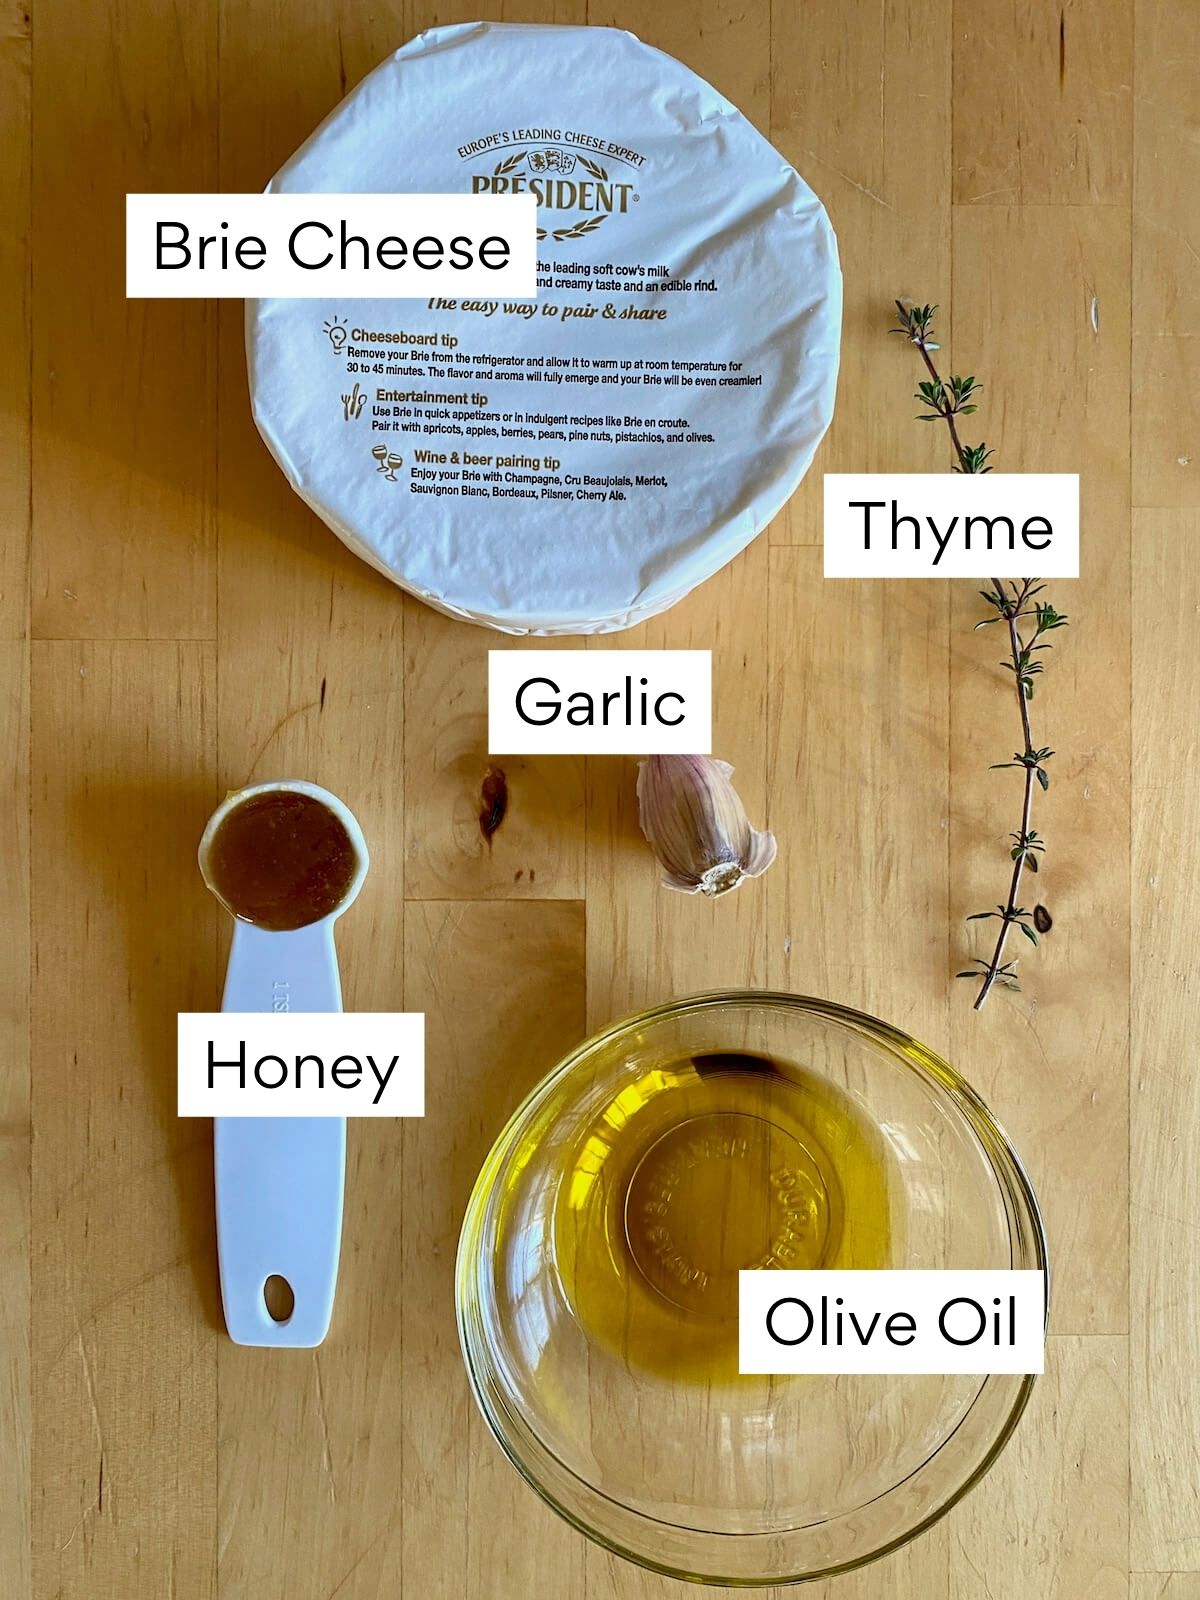 The ingredients to make baked brie with garlic. Each ingredient is labeled with text. They include Brie cheese, thyme, garlic, honey, and olive oil.